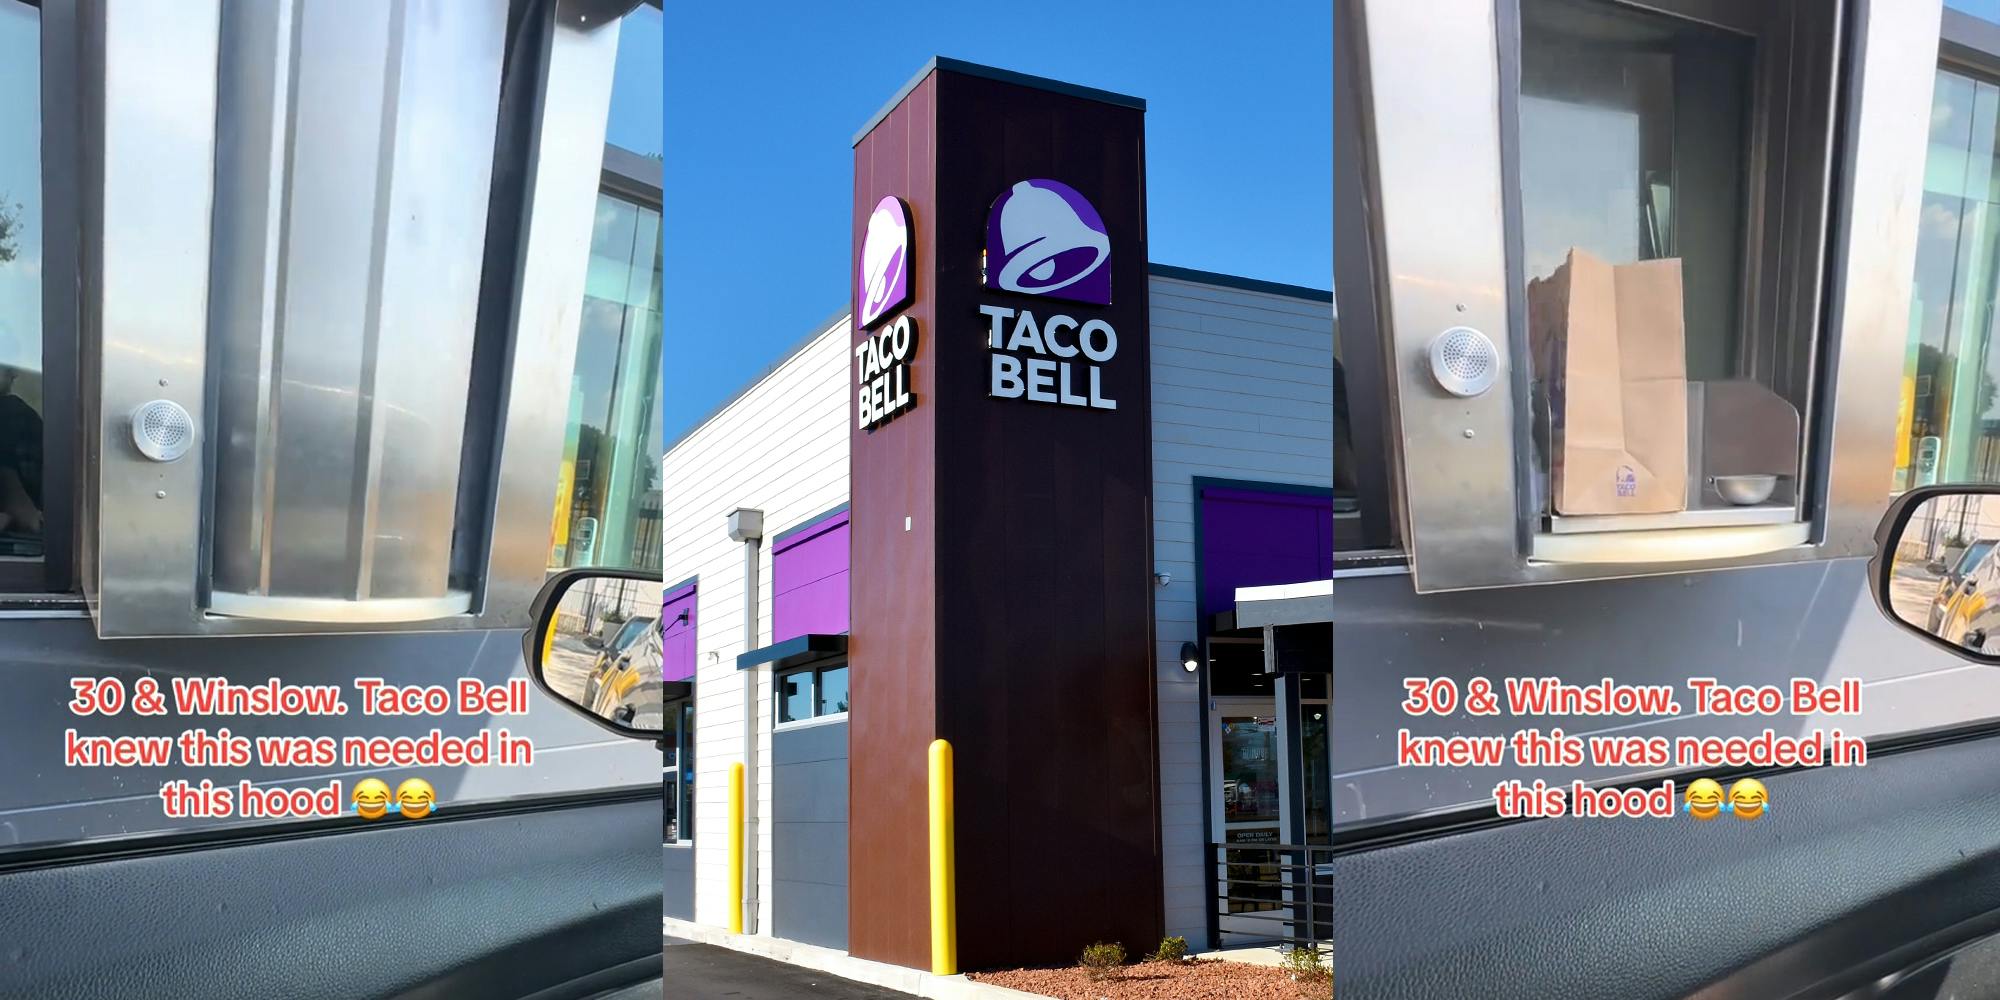 Taco Bell drive thru window with caption "30 & Winslow, Taco Bell knew this was needed in this hood" (l) Taco Bell building with sign (c) Taco Bell drive thru window with caption "30 & Winslow, Taco Bell knew this was needed in this hood" (r)